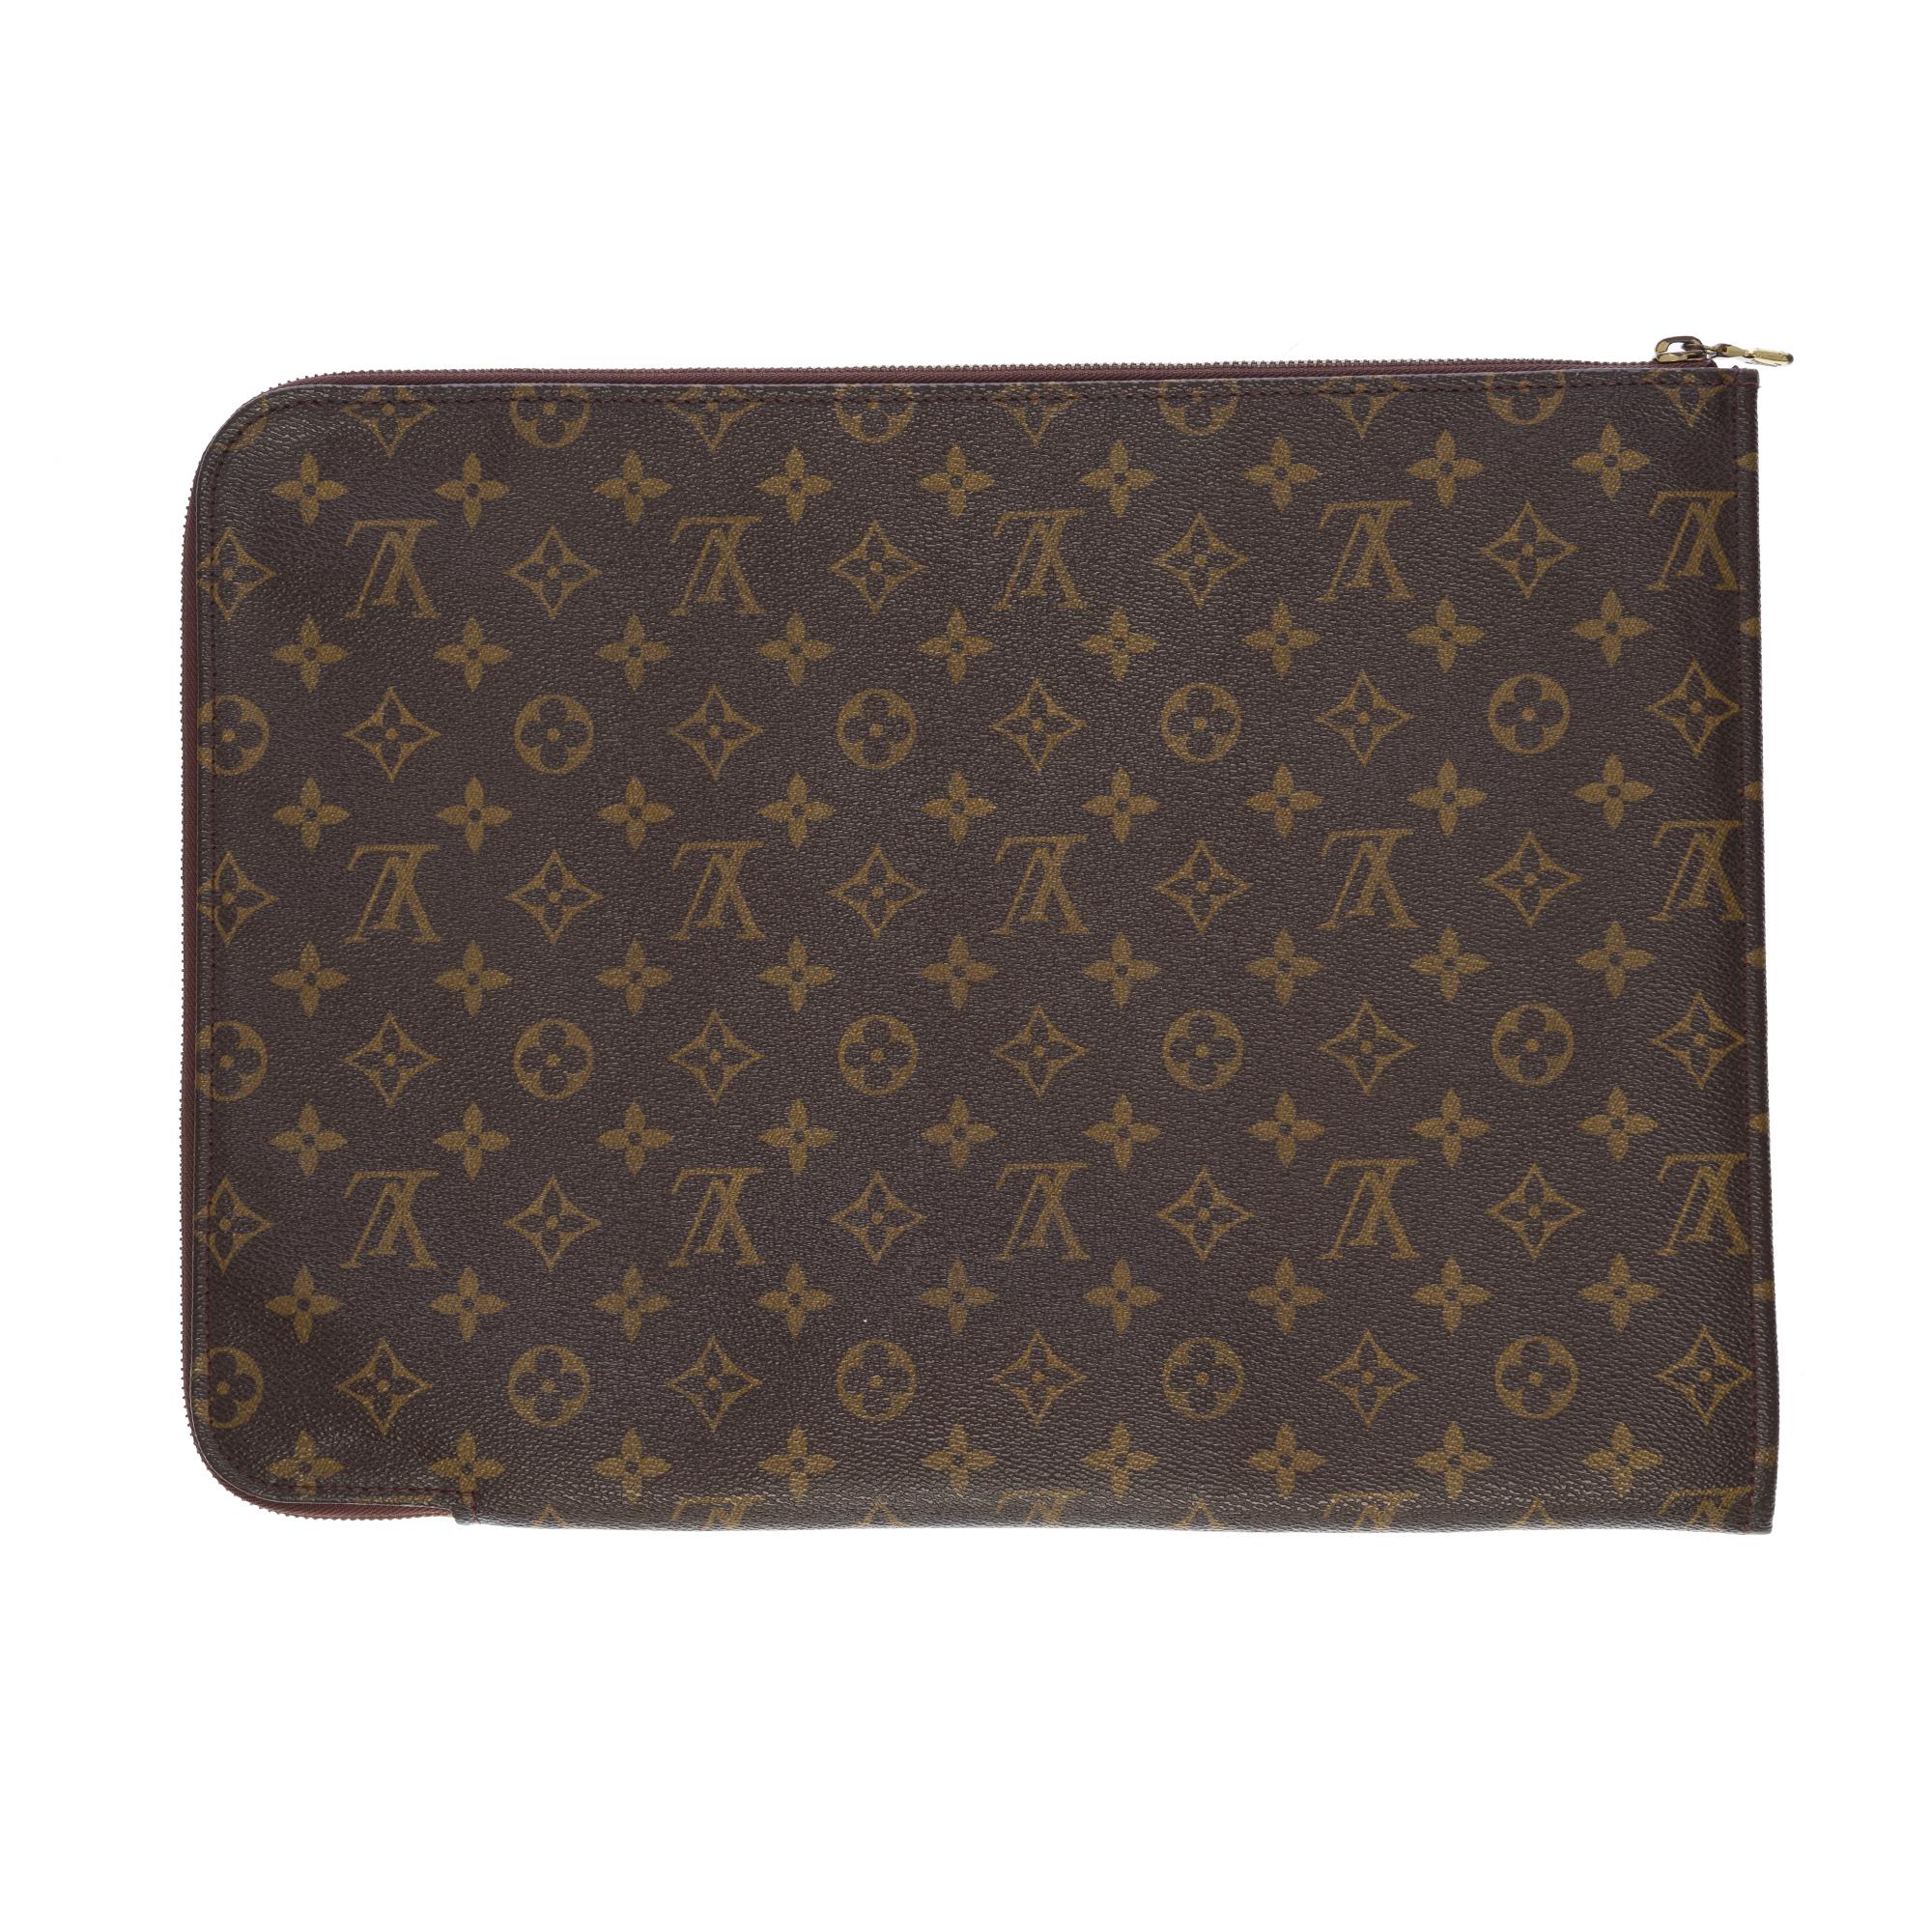 Louis Vuitton document holder in brown monogram canvas, gold metal hardware.
Top and zip closure.
Brown leather interior.
Dimensions: 28.5 * 38.5 * 2 cm (11.22 * 15.15 * 0.78 In.)
Signature: 